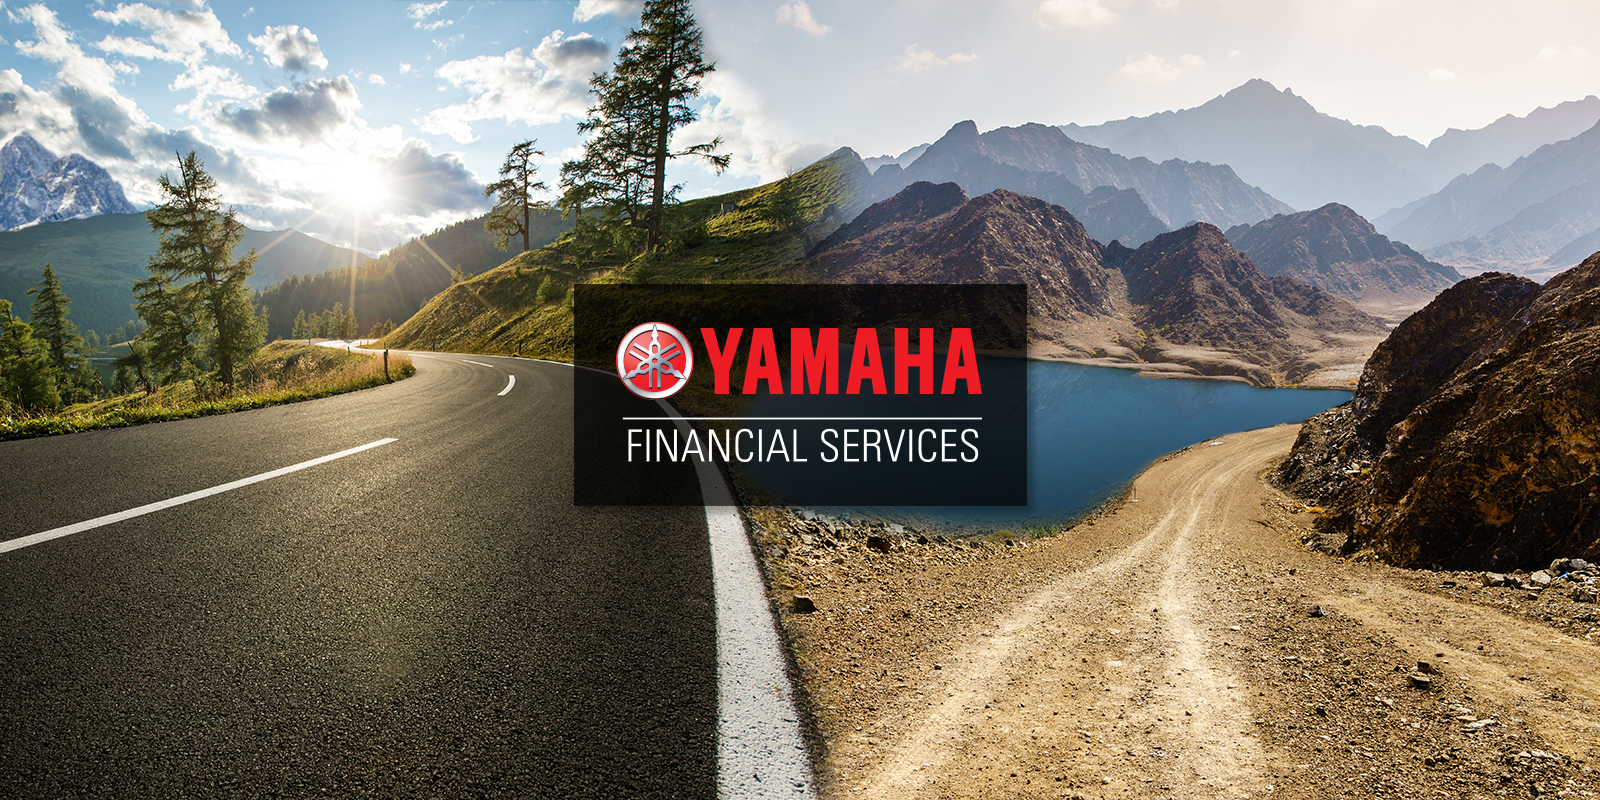 A view of the Yamaha Financial Services advert from their website depicting a road in green verdure, set against a desert, first-filled road on the right